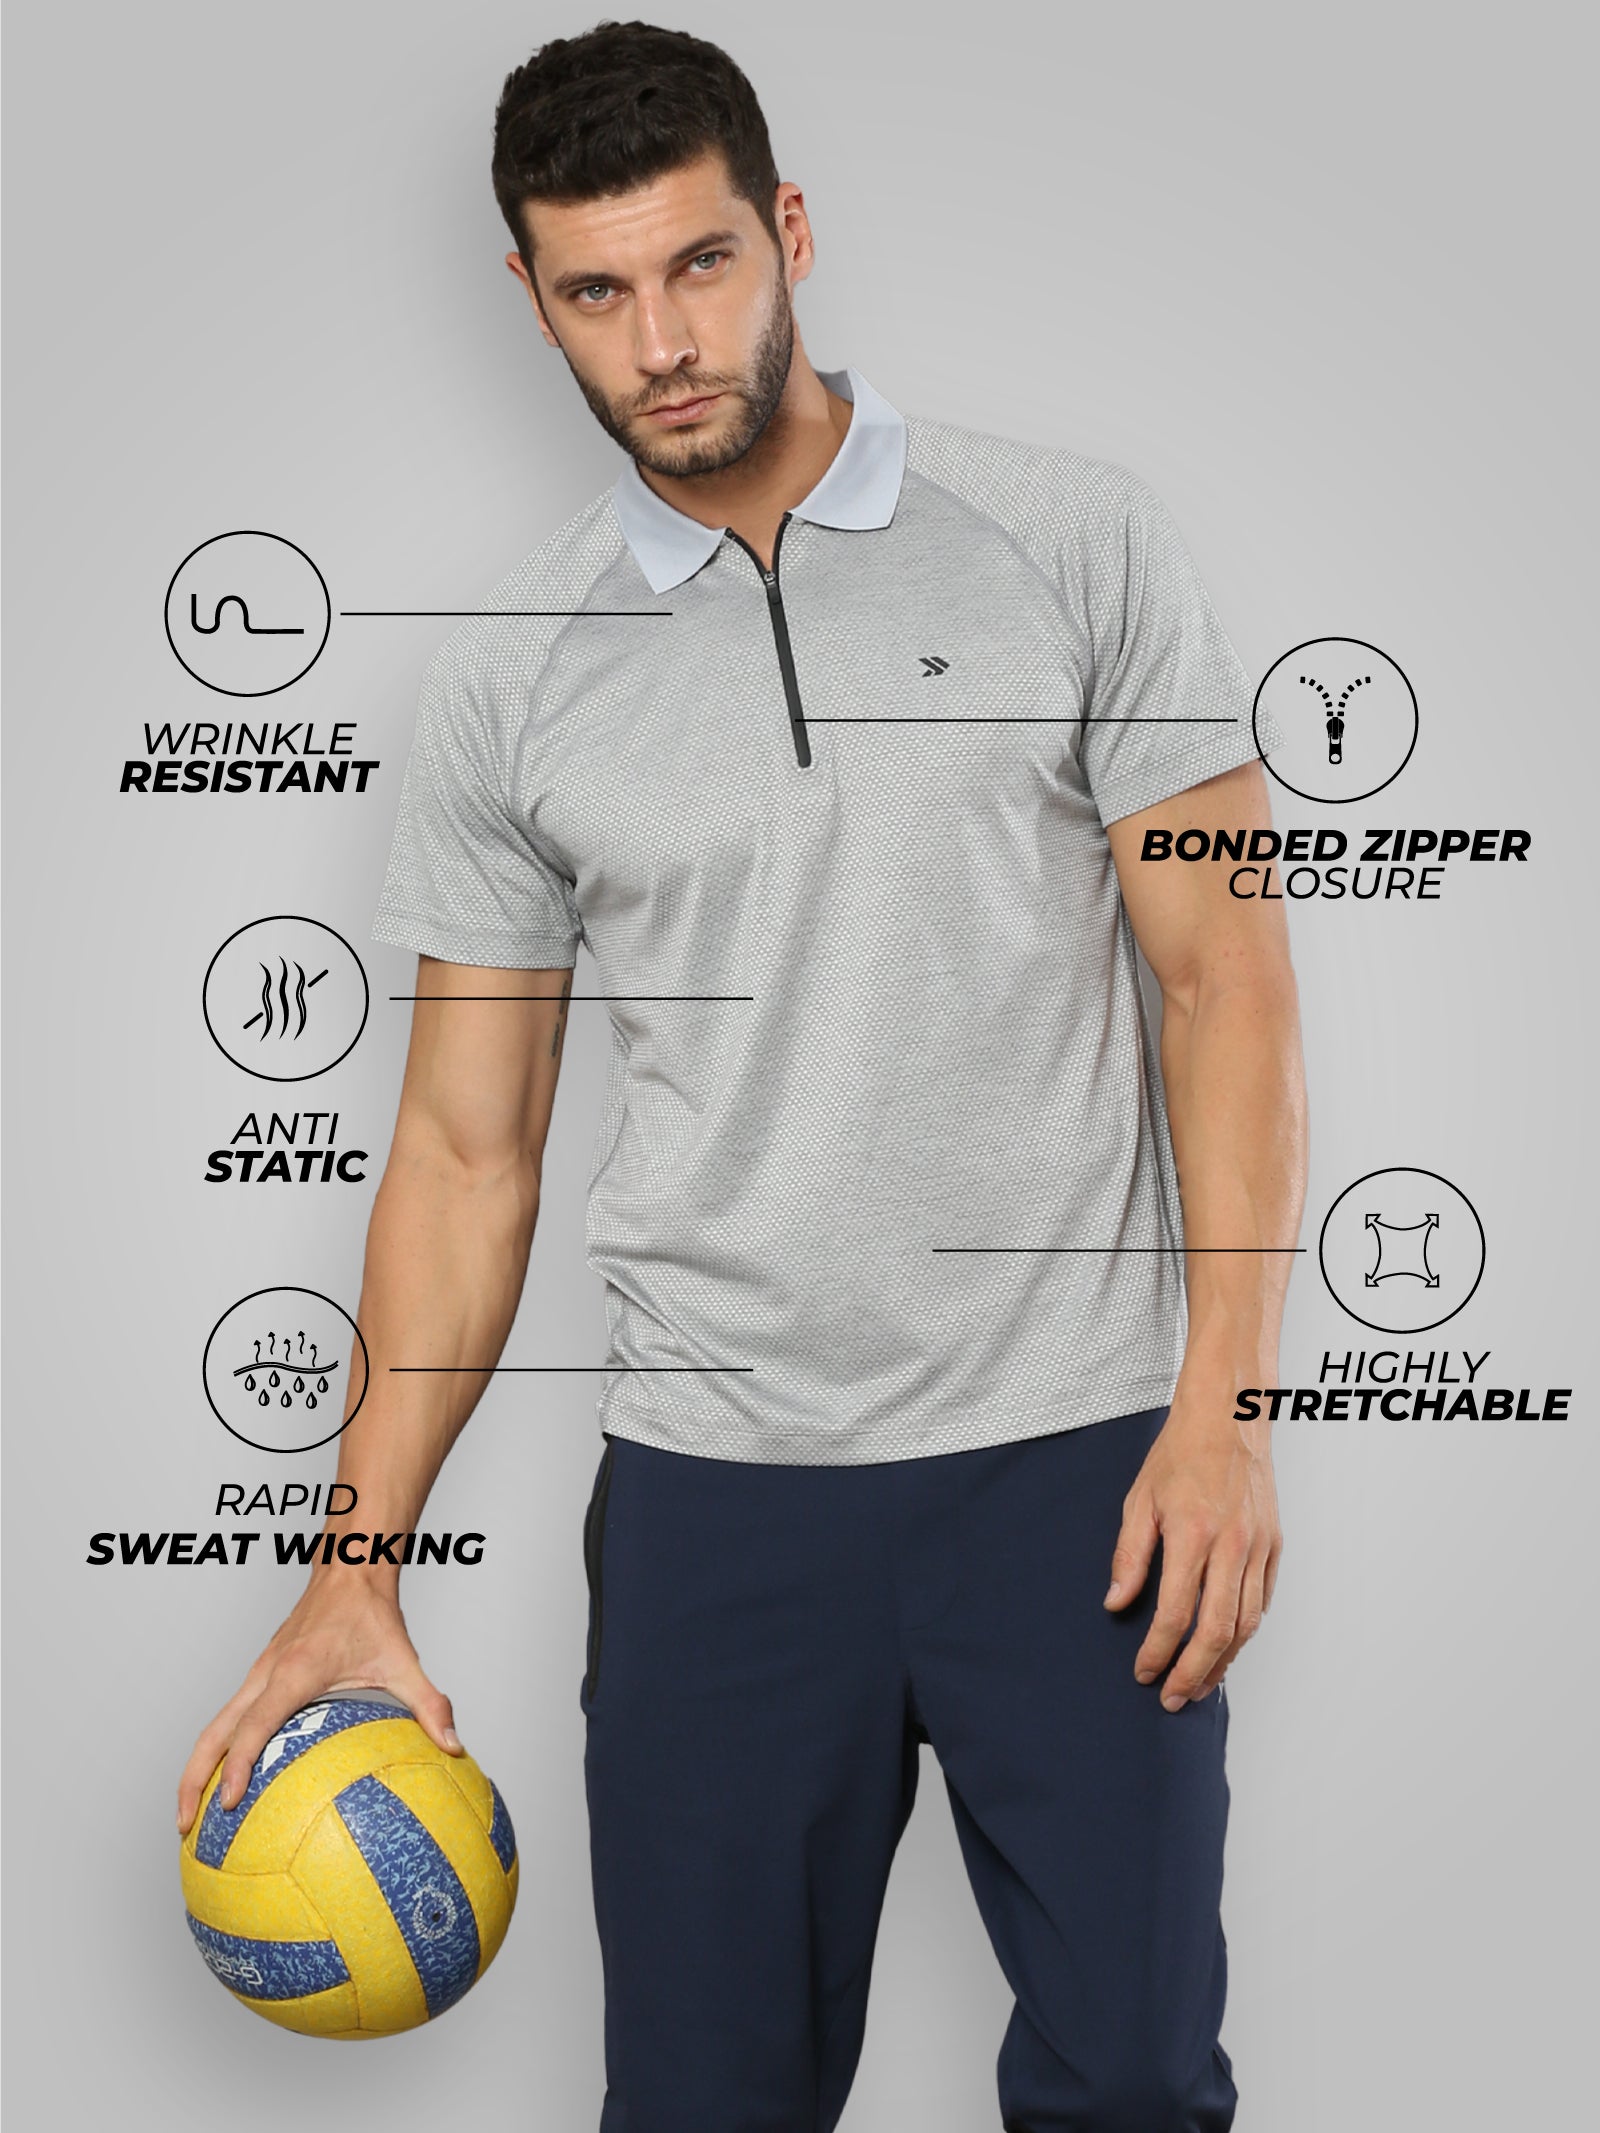 Men's Polo T shirts - Tshirts For Men Online - Grey Color